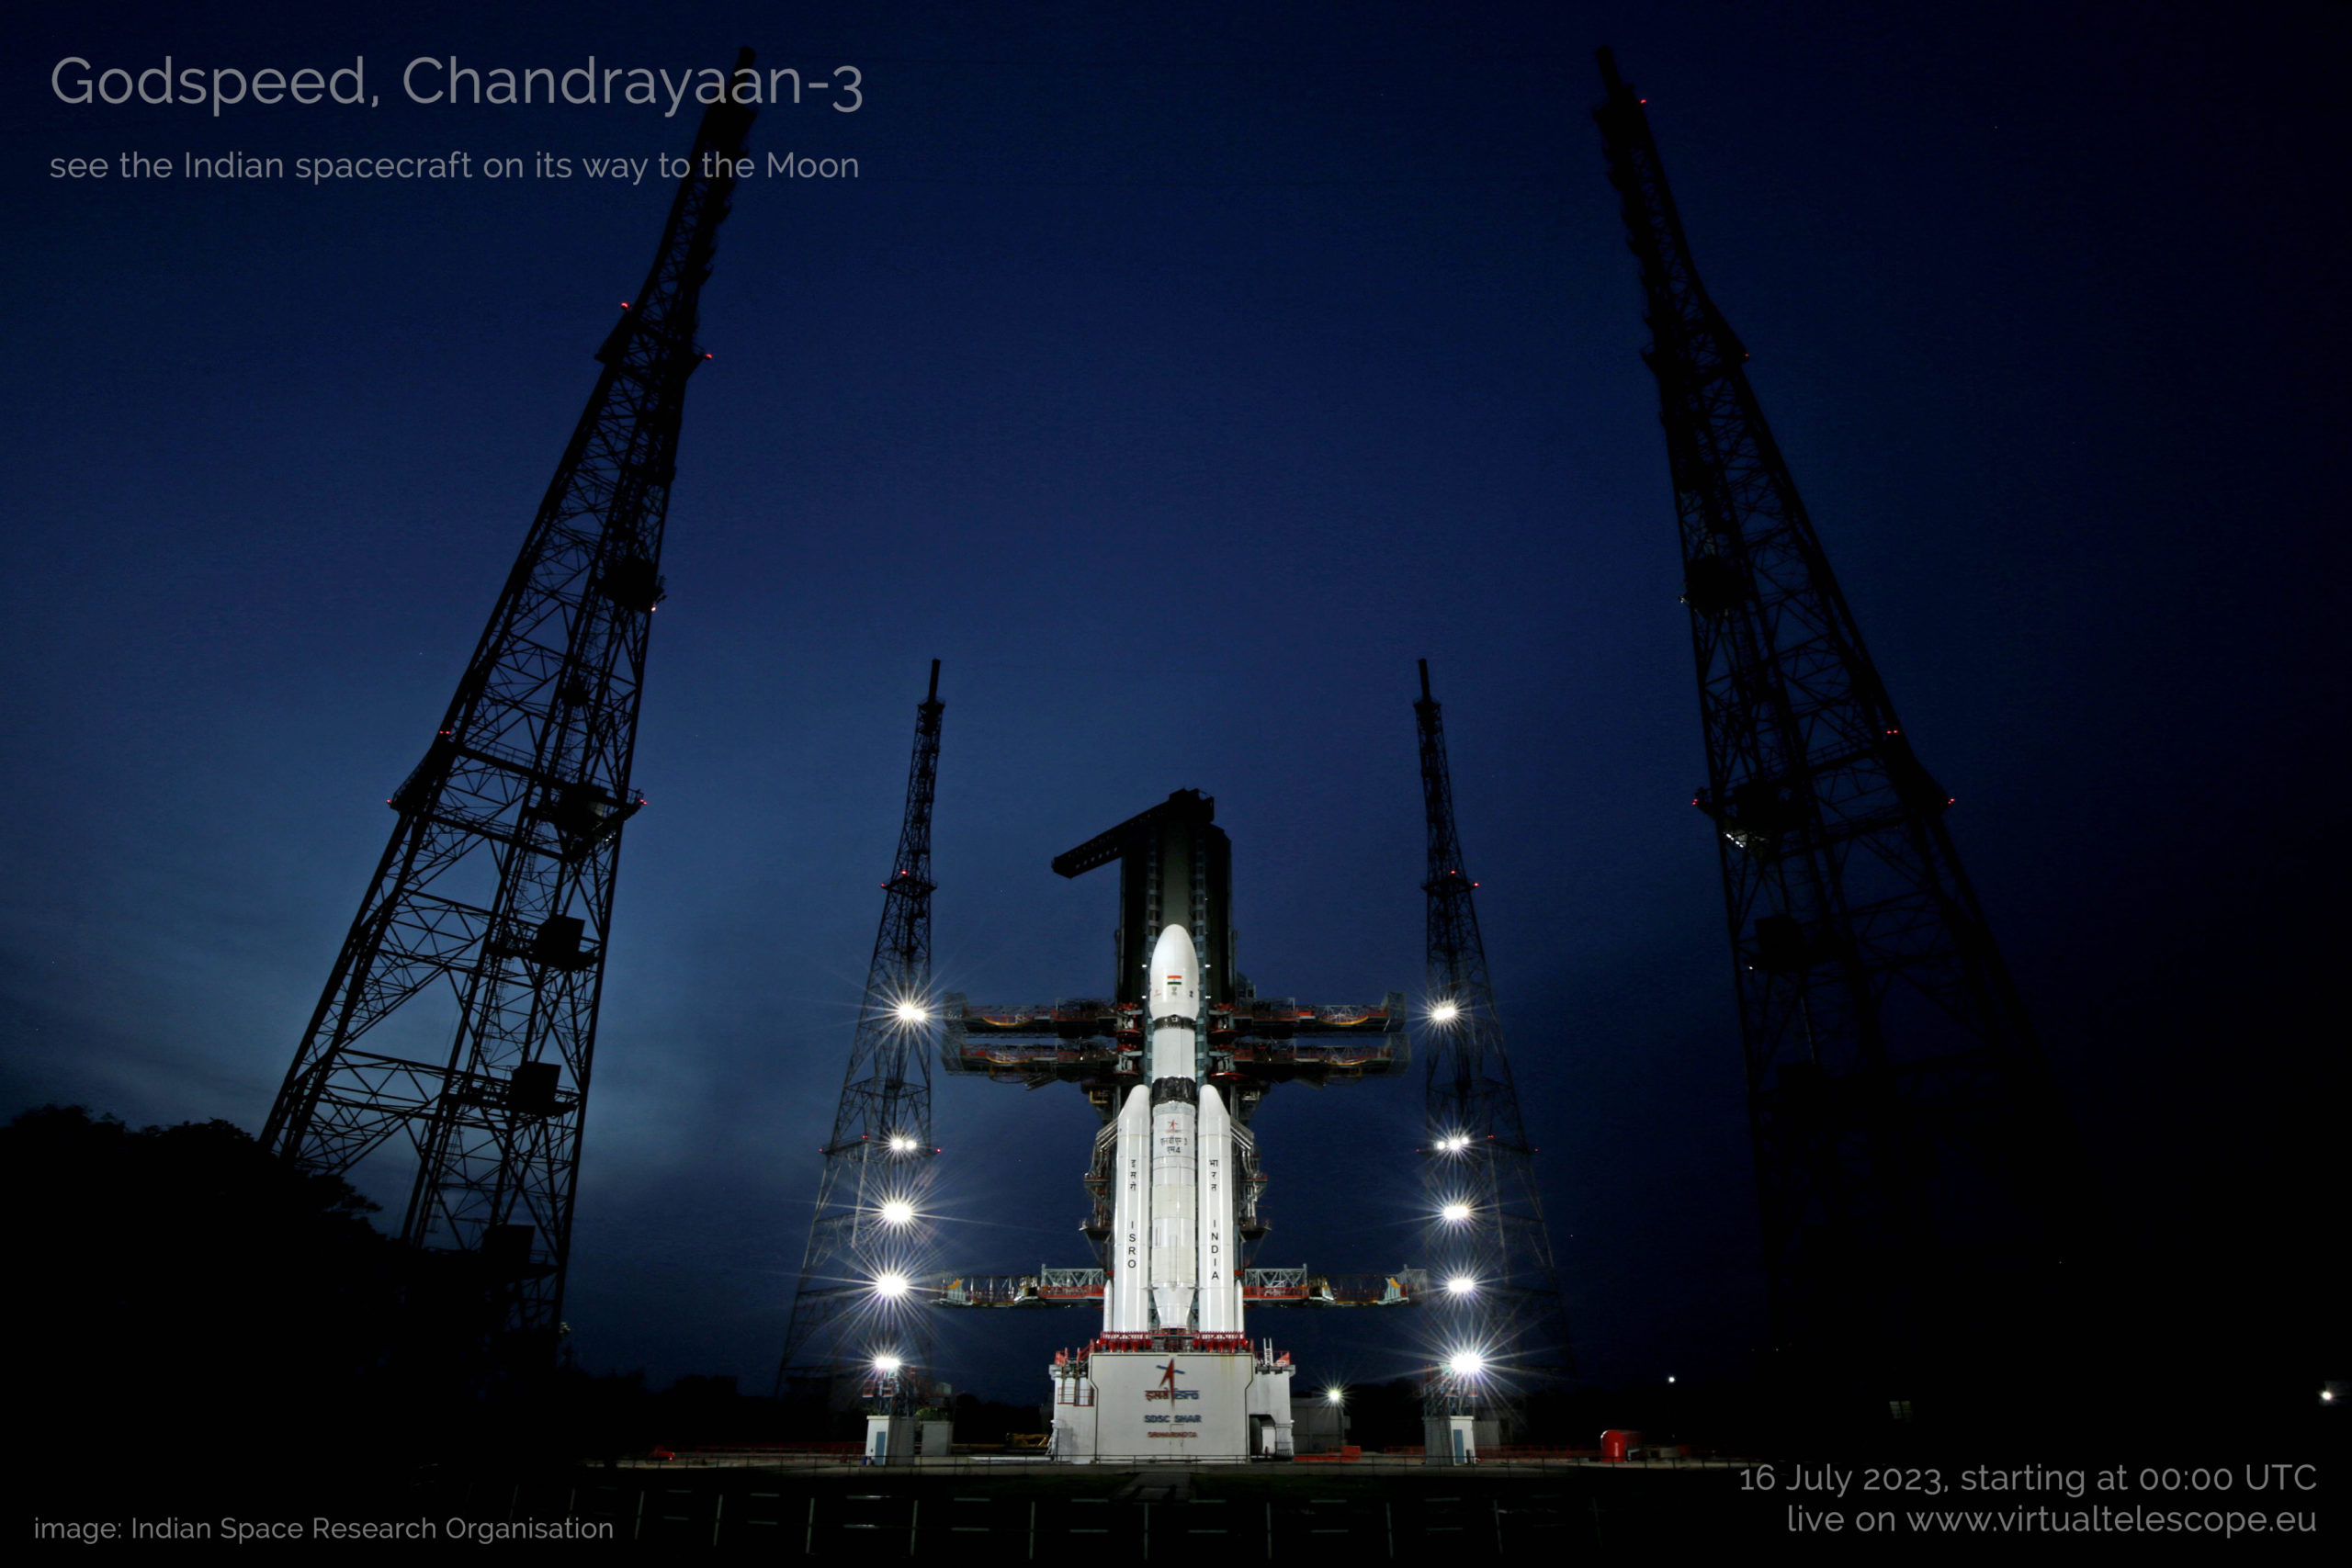 See the Chandrayaan3 space probe on its way to the Moon, live 16